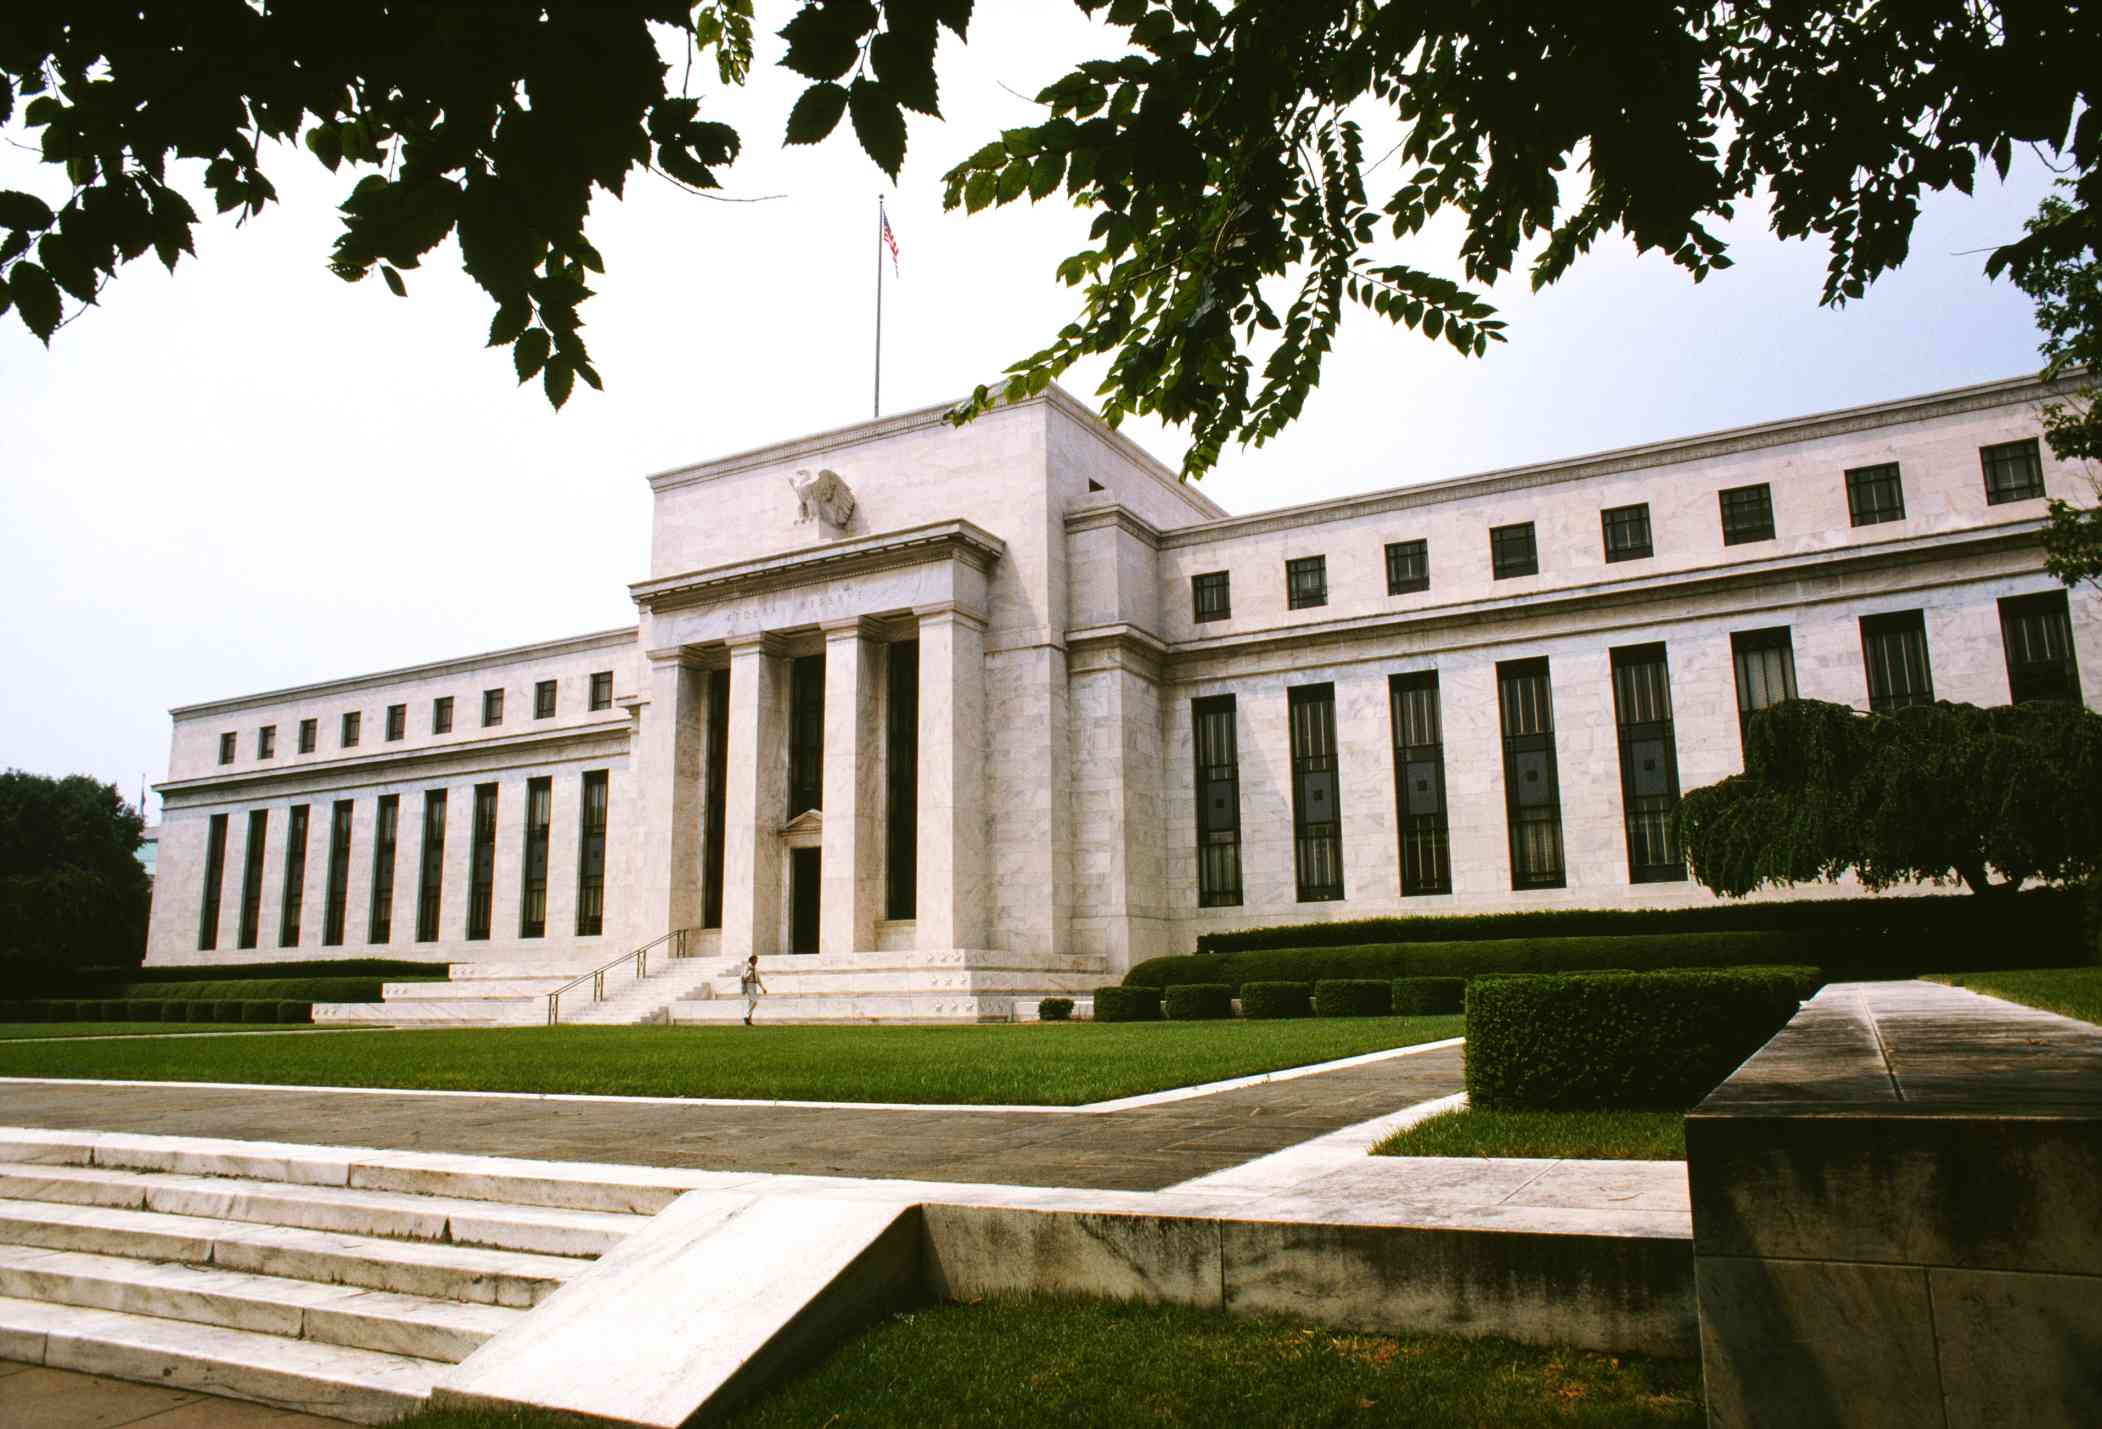 Federal Reserve System headquarters